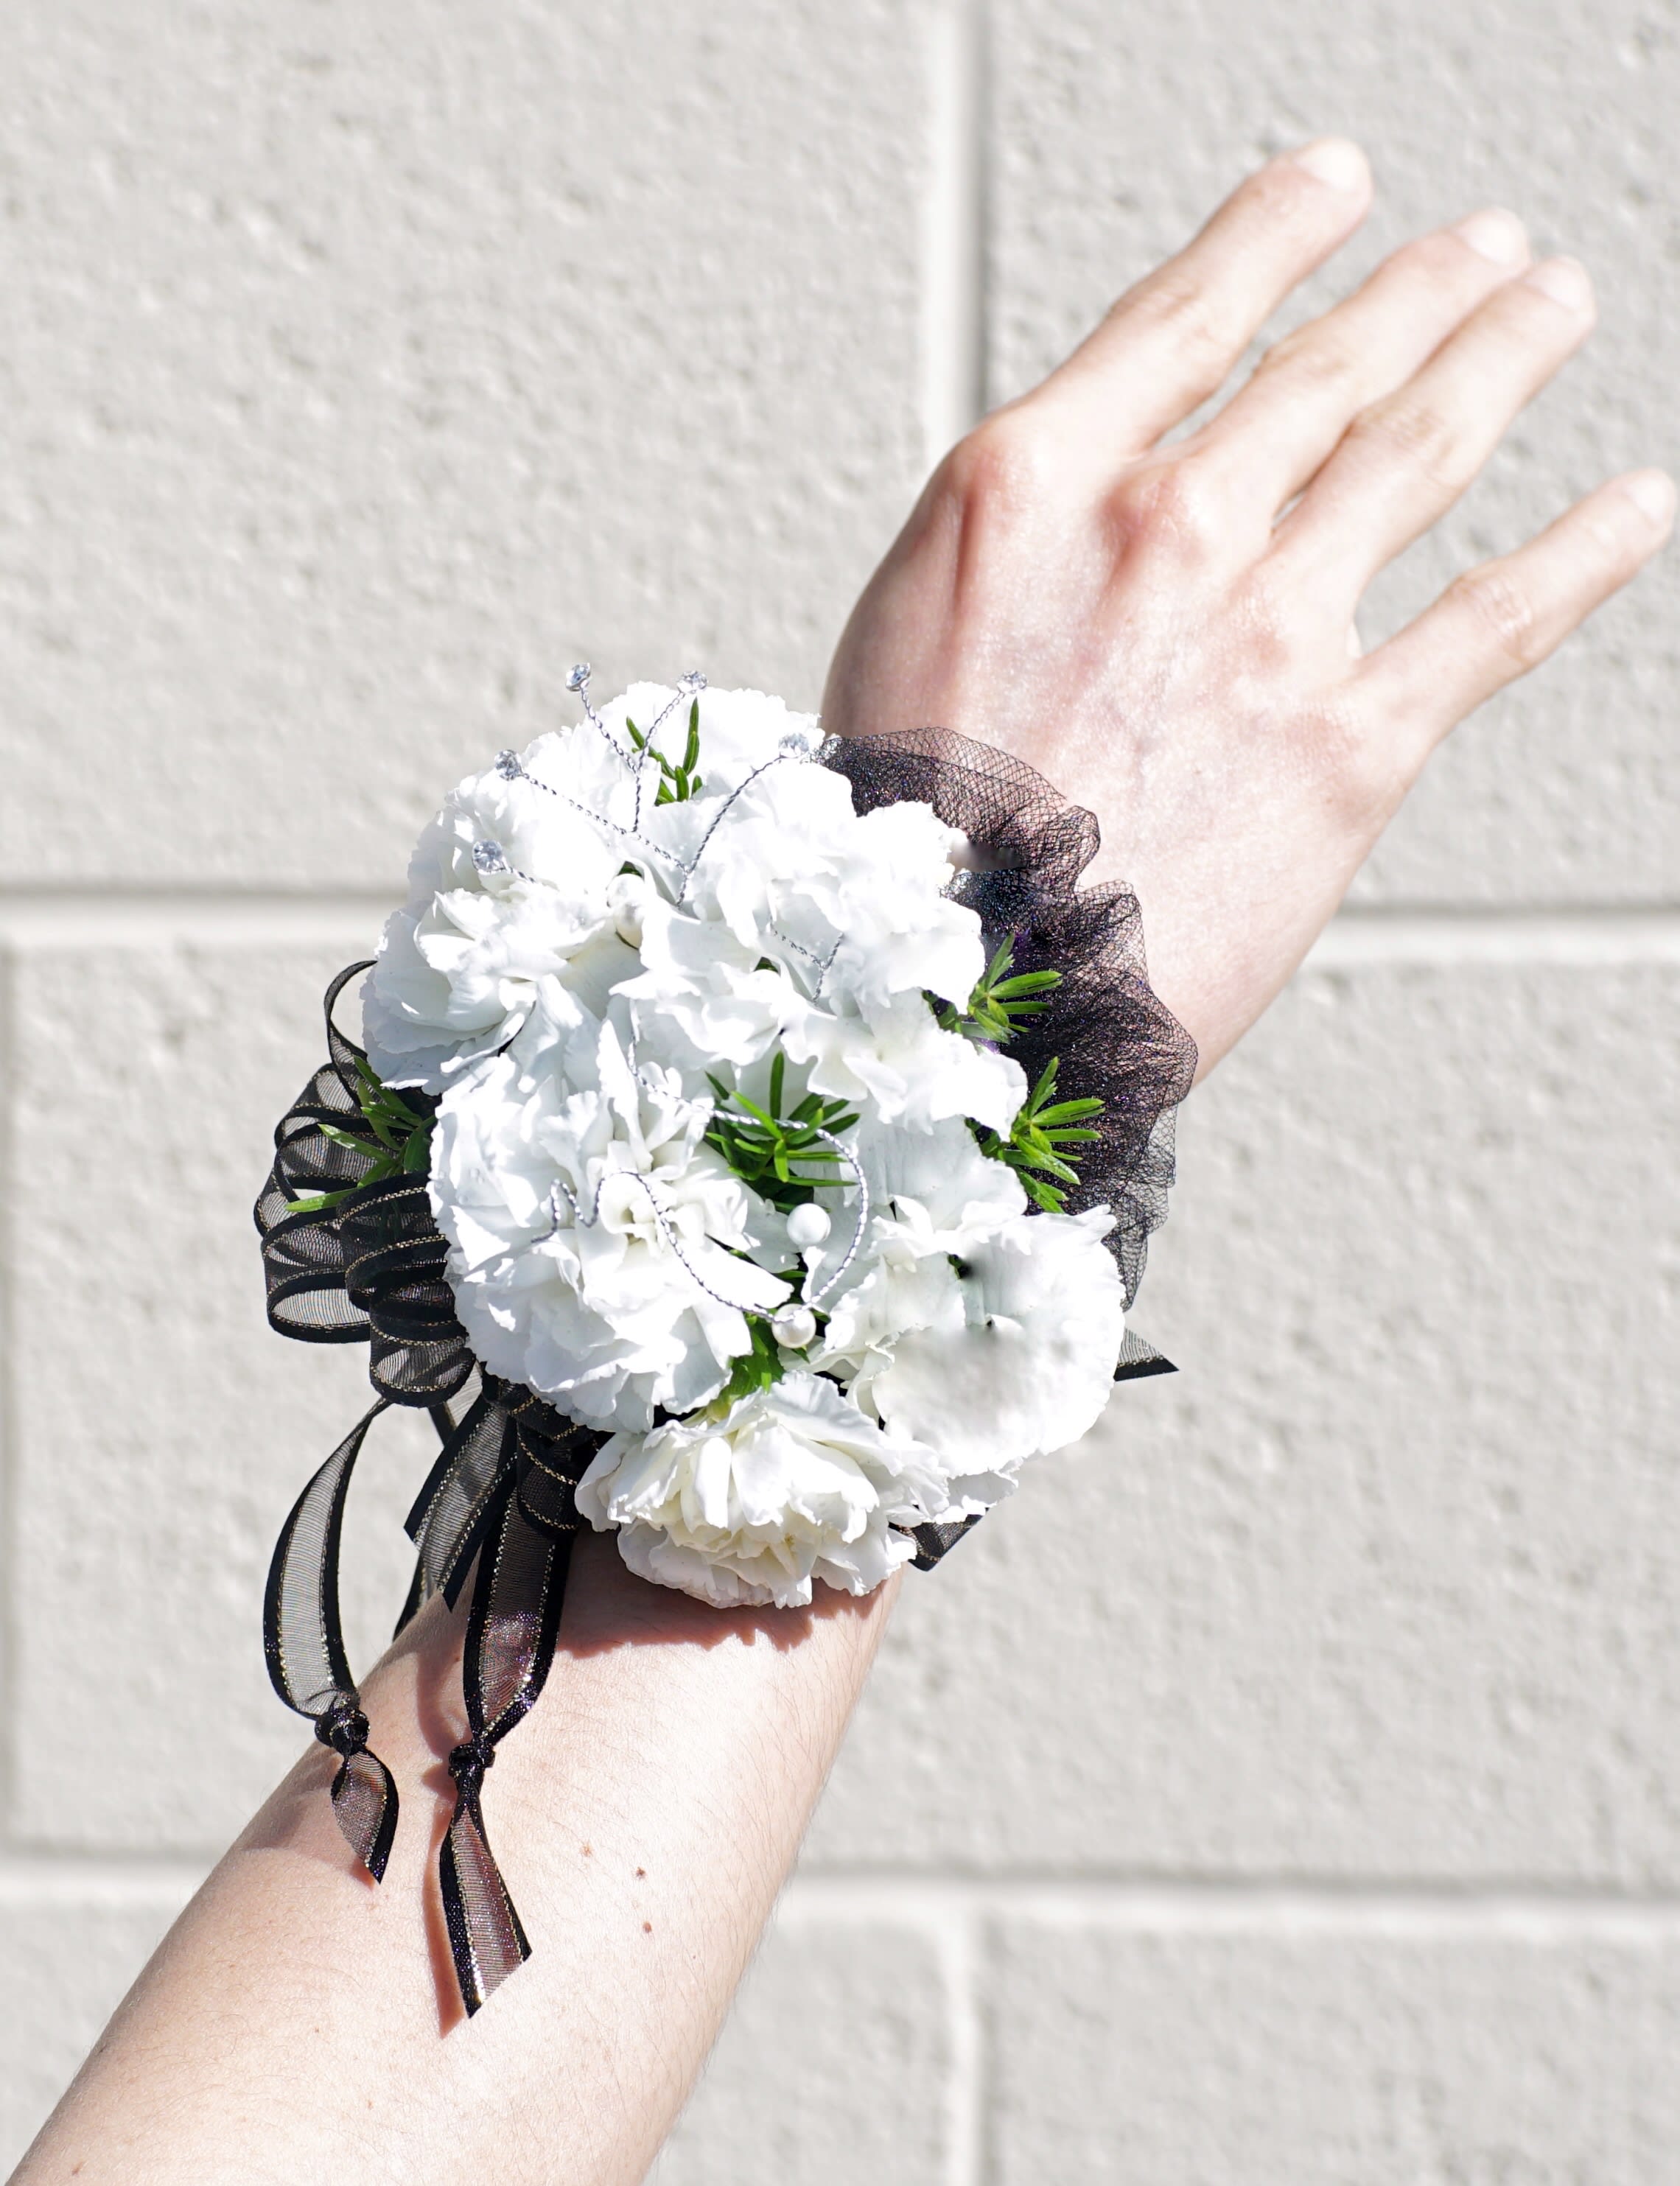 Wrist Corsage 27 - Wrist corsage with carnation and accents. CUSTOMER CAN CHOOSE ANY COLOR. STANDARD: WRIST CORSAGE DELUXE: WRIST CORSAGE + BOUTONNIERE